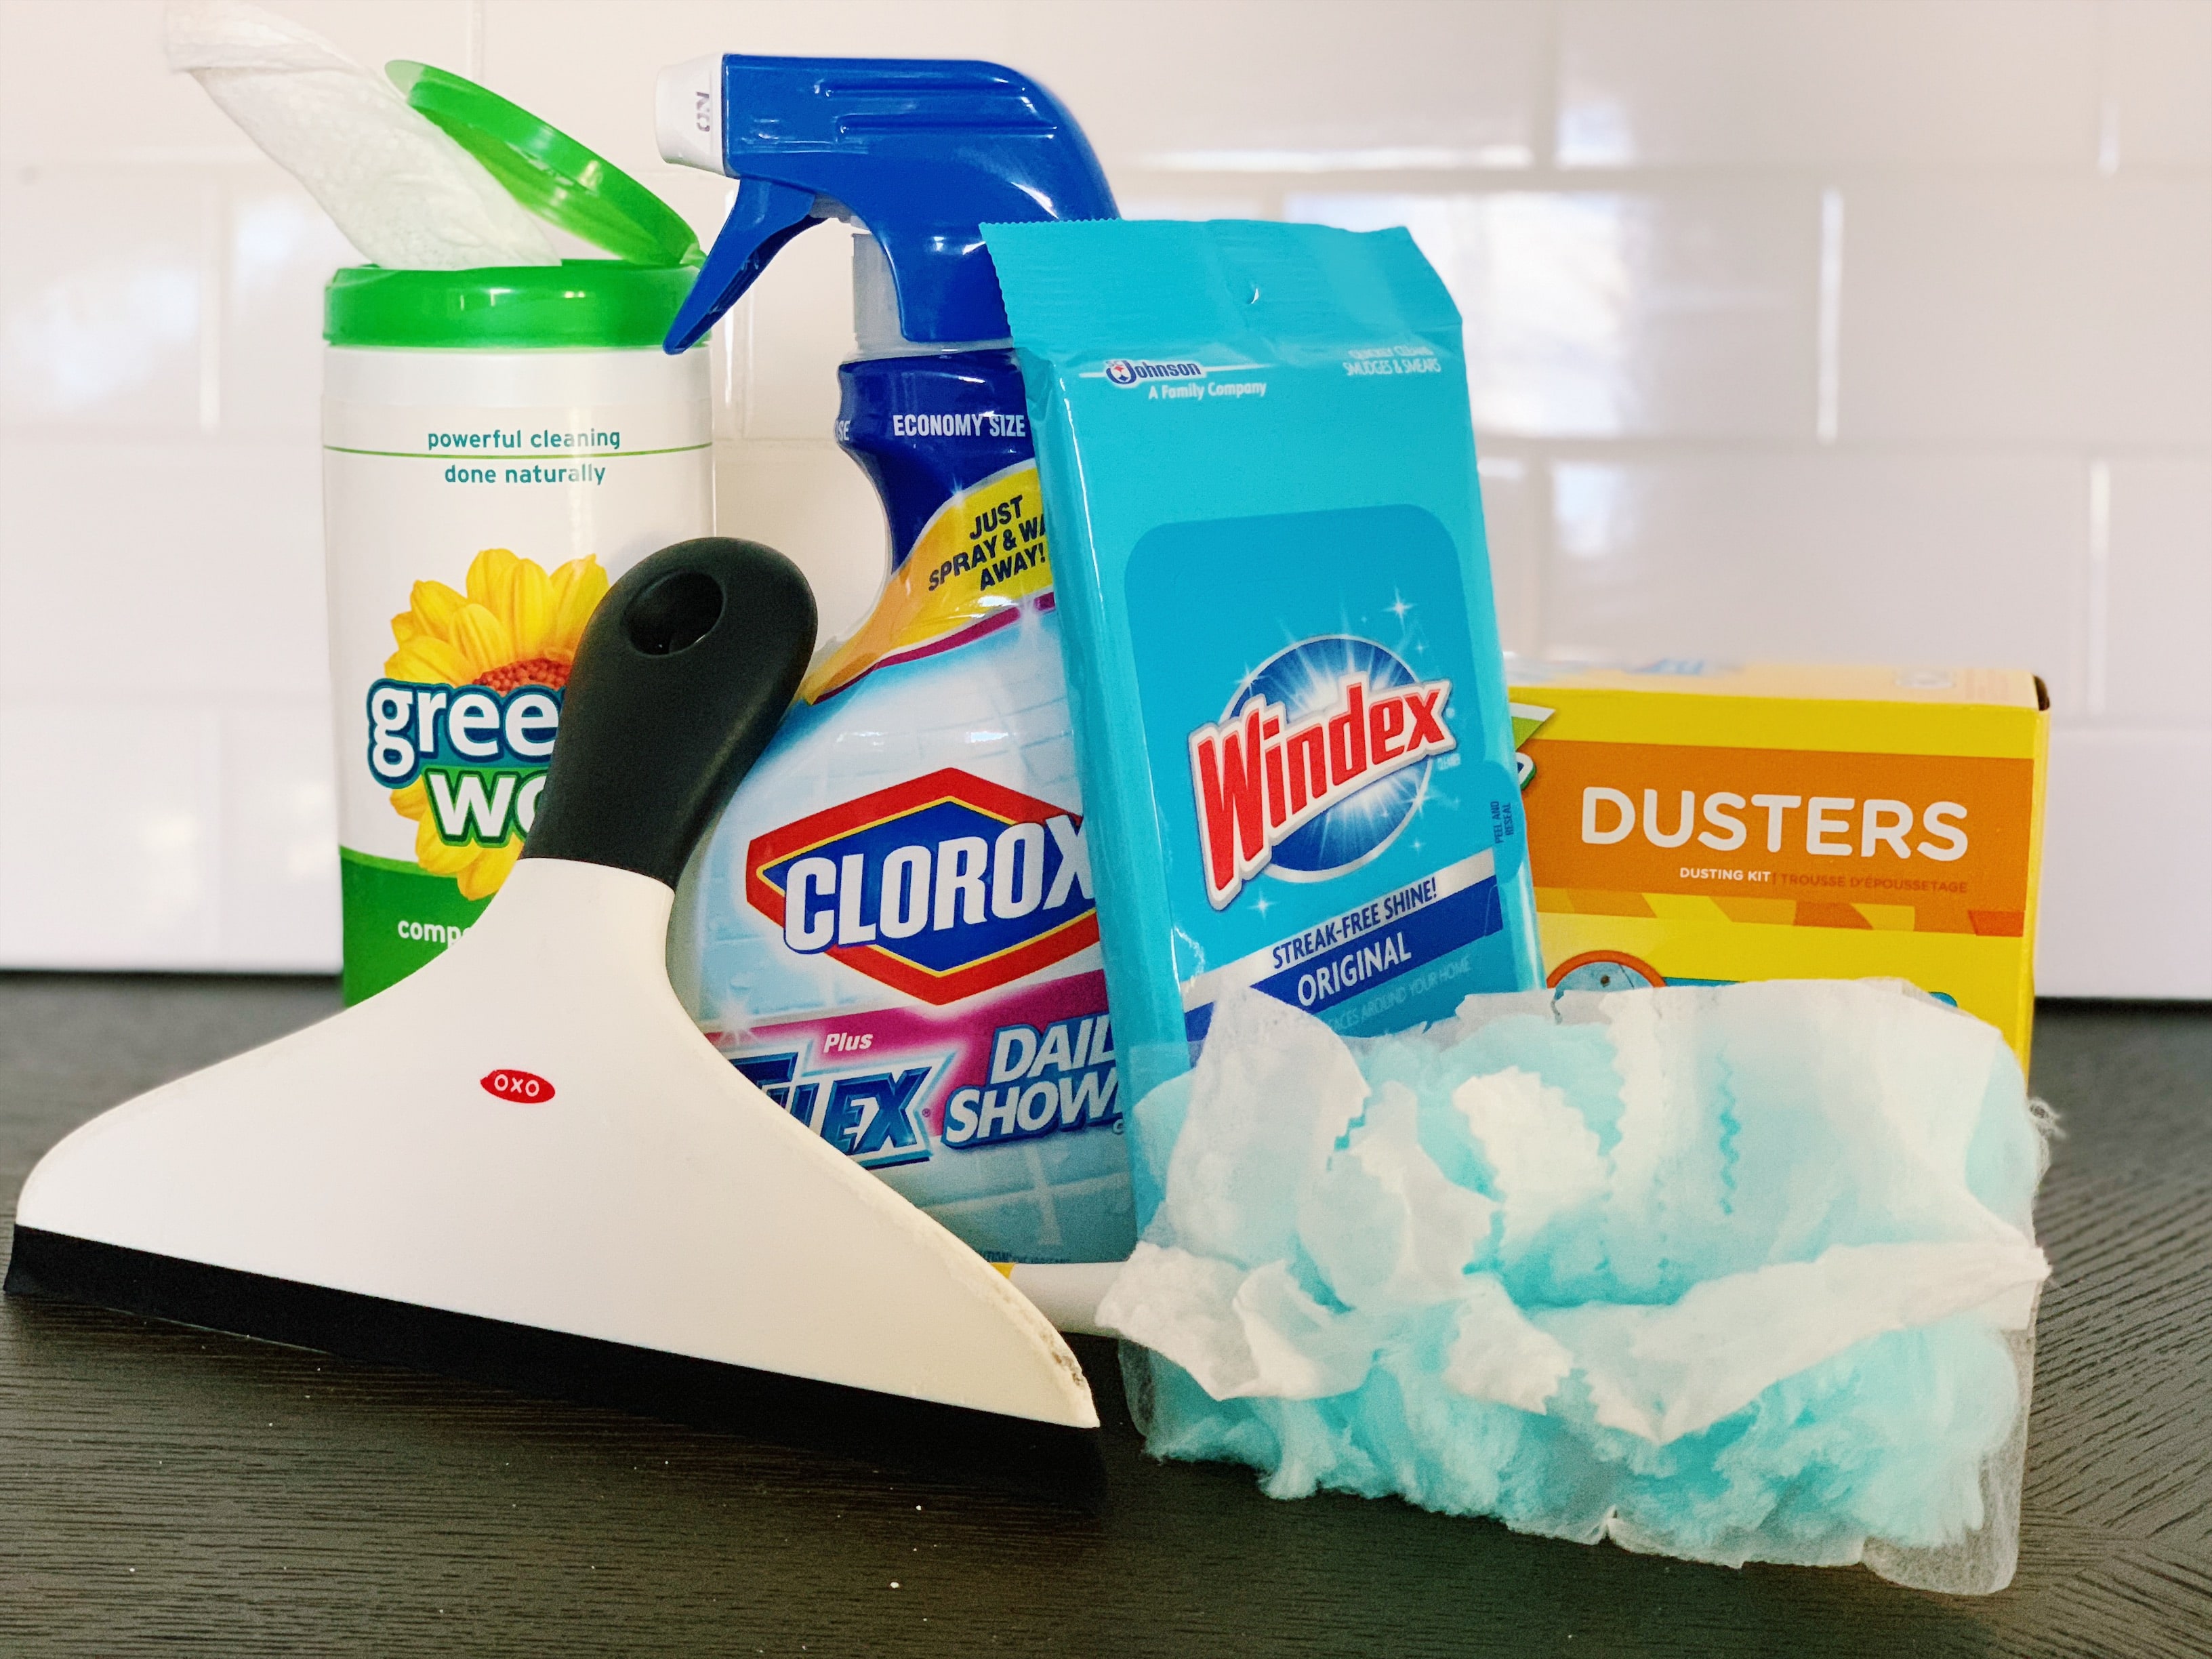 Don't have any extra time to clean during the hustle and bustle of the holiday season? No sweat! Our holiday speed cleaning routine can help you tidy your home in half the time to help you keep your sparkle all season long!